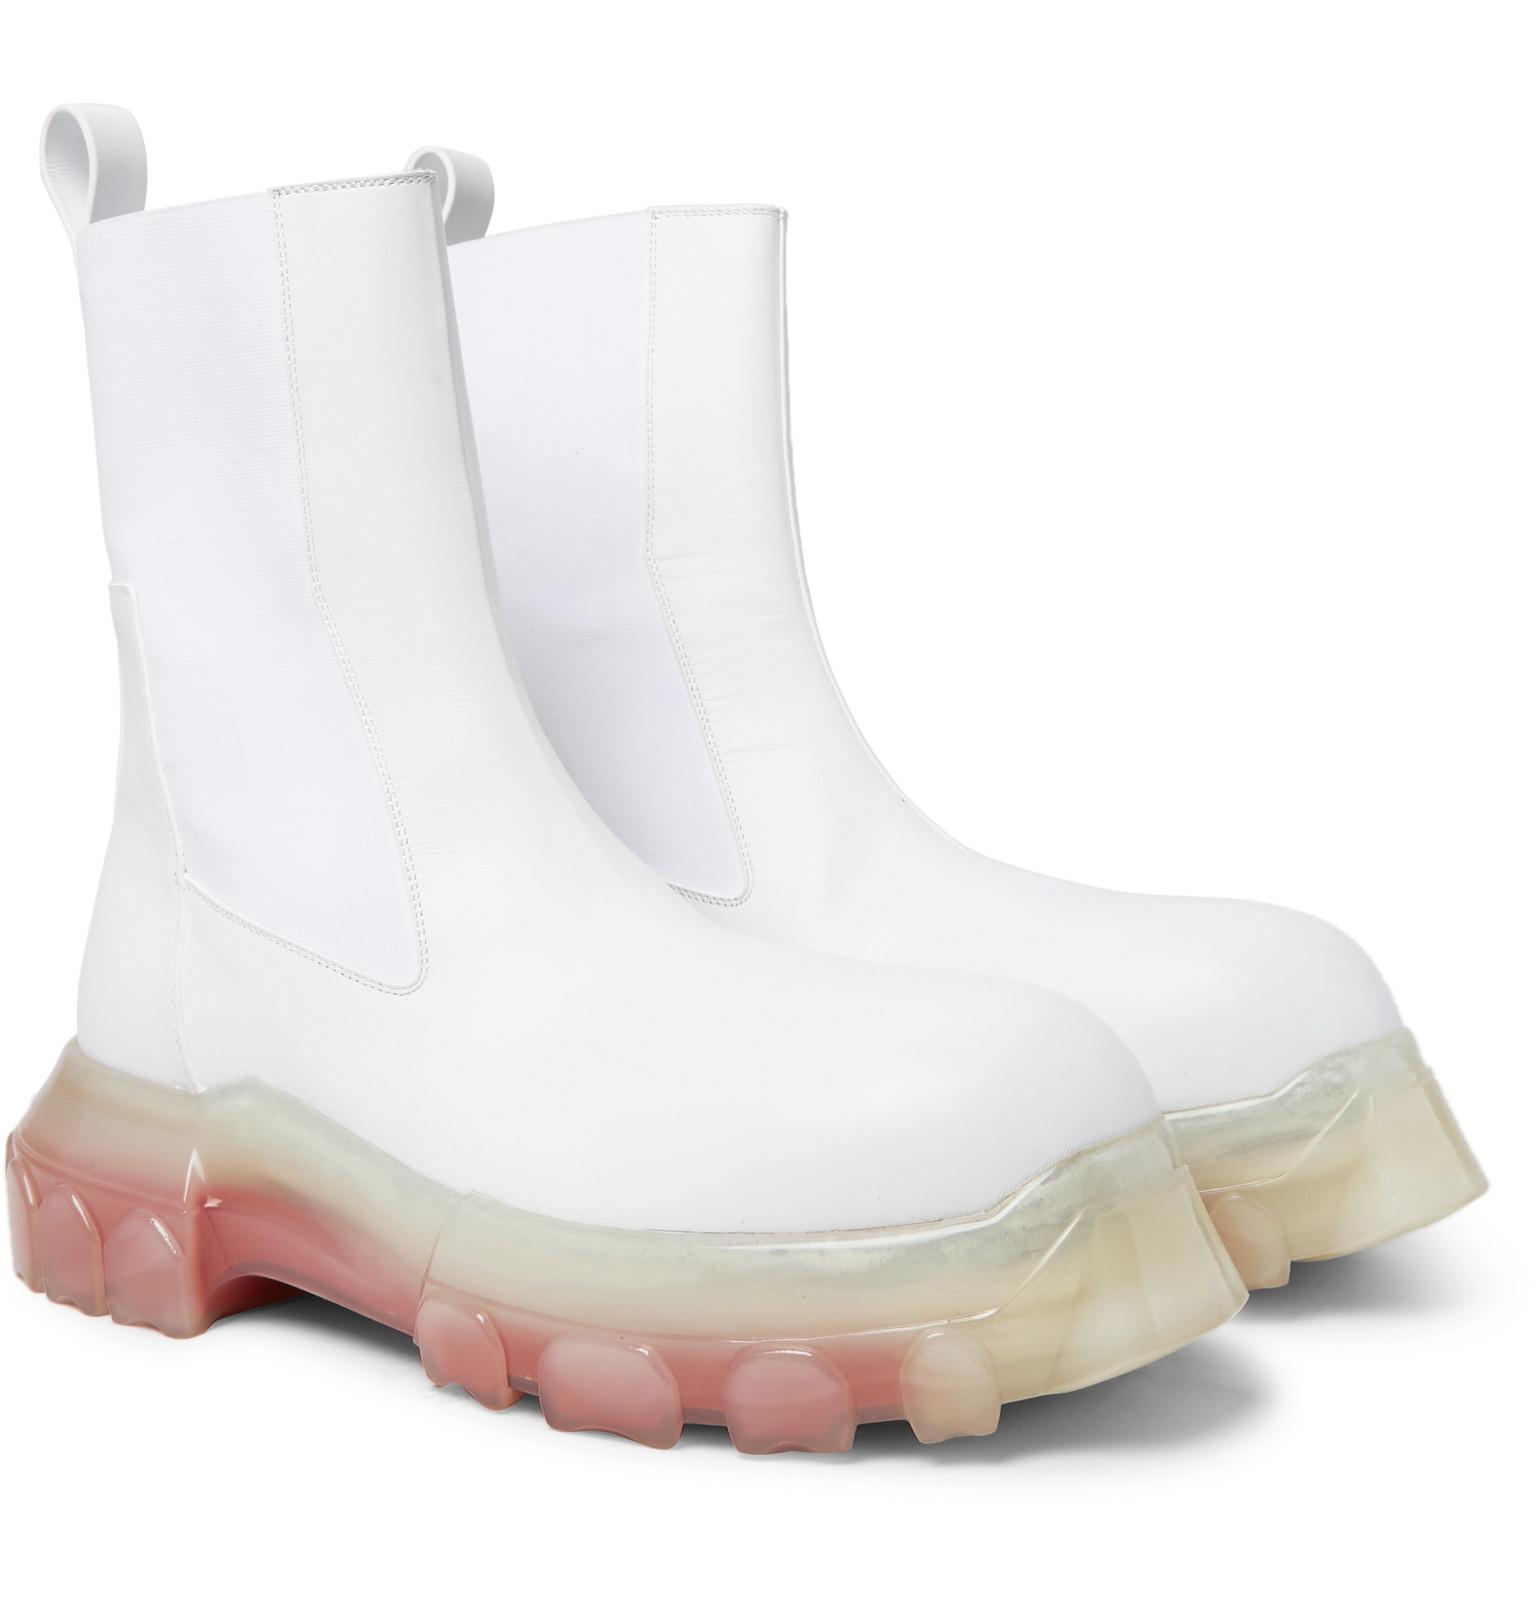 Rick Owens Mega Bozo Tractor Beetle Leather Boots in White for Men 